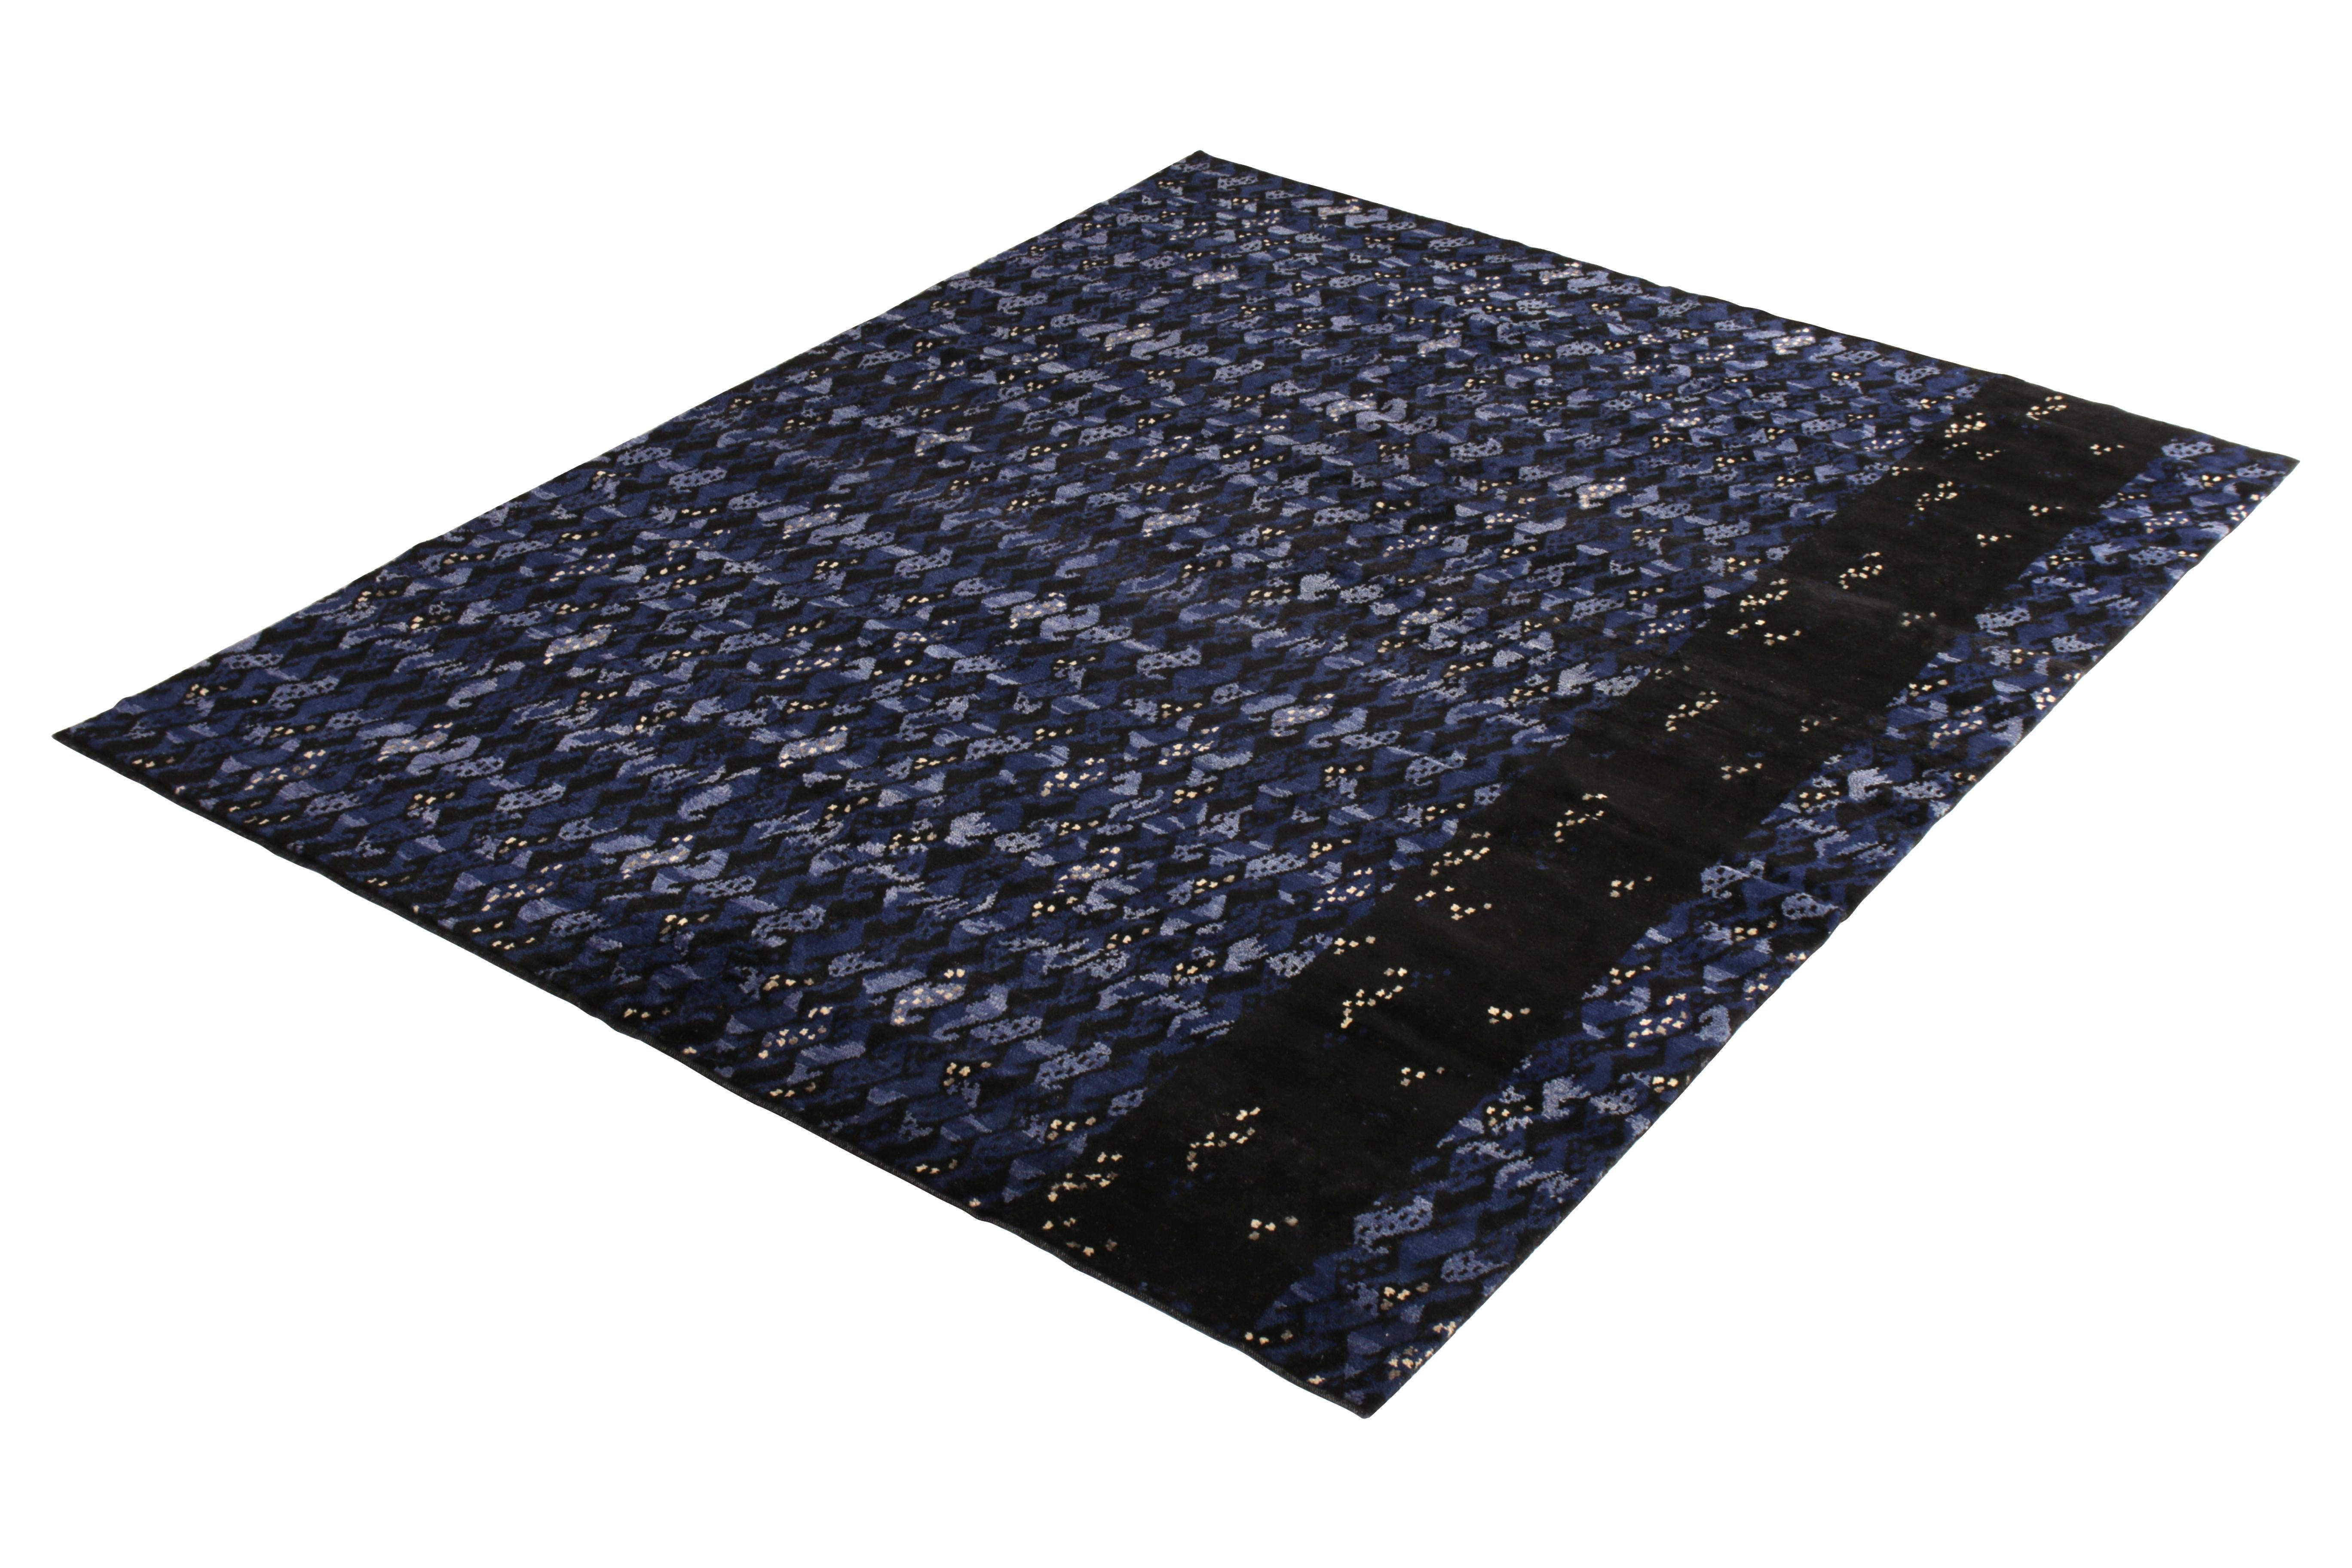 Hand knotted in texturally soft, durable wool pile, this modern 9 × 12 rug hails from the latest pile additions to Rug & Kilim’s Scandinavian collection, a celebration of Swedish modernism with new large scale geometry and exciting vintage colorways